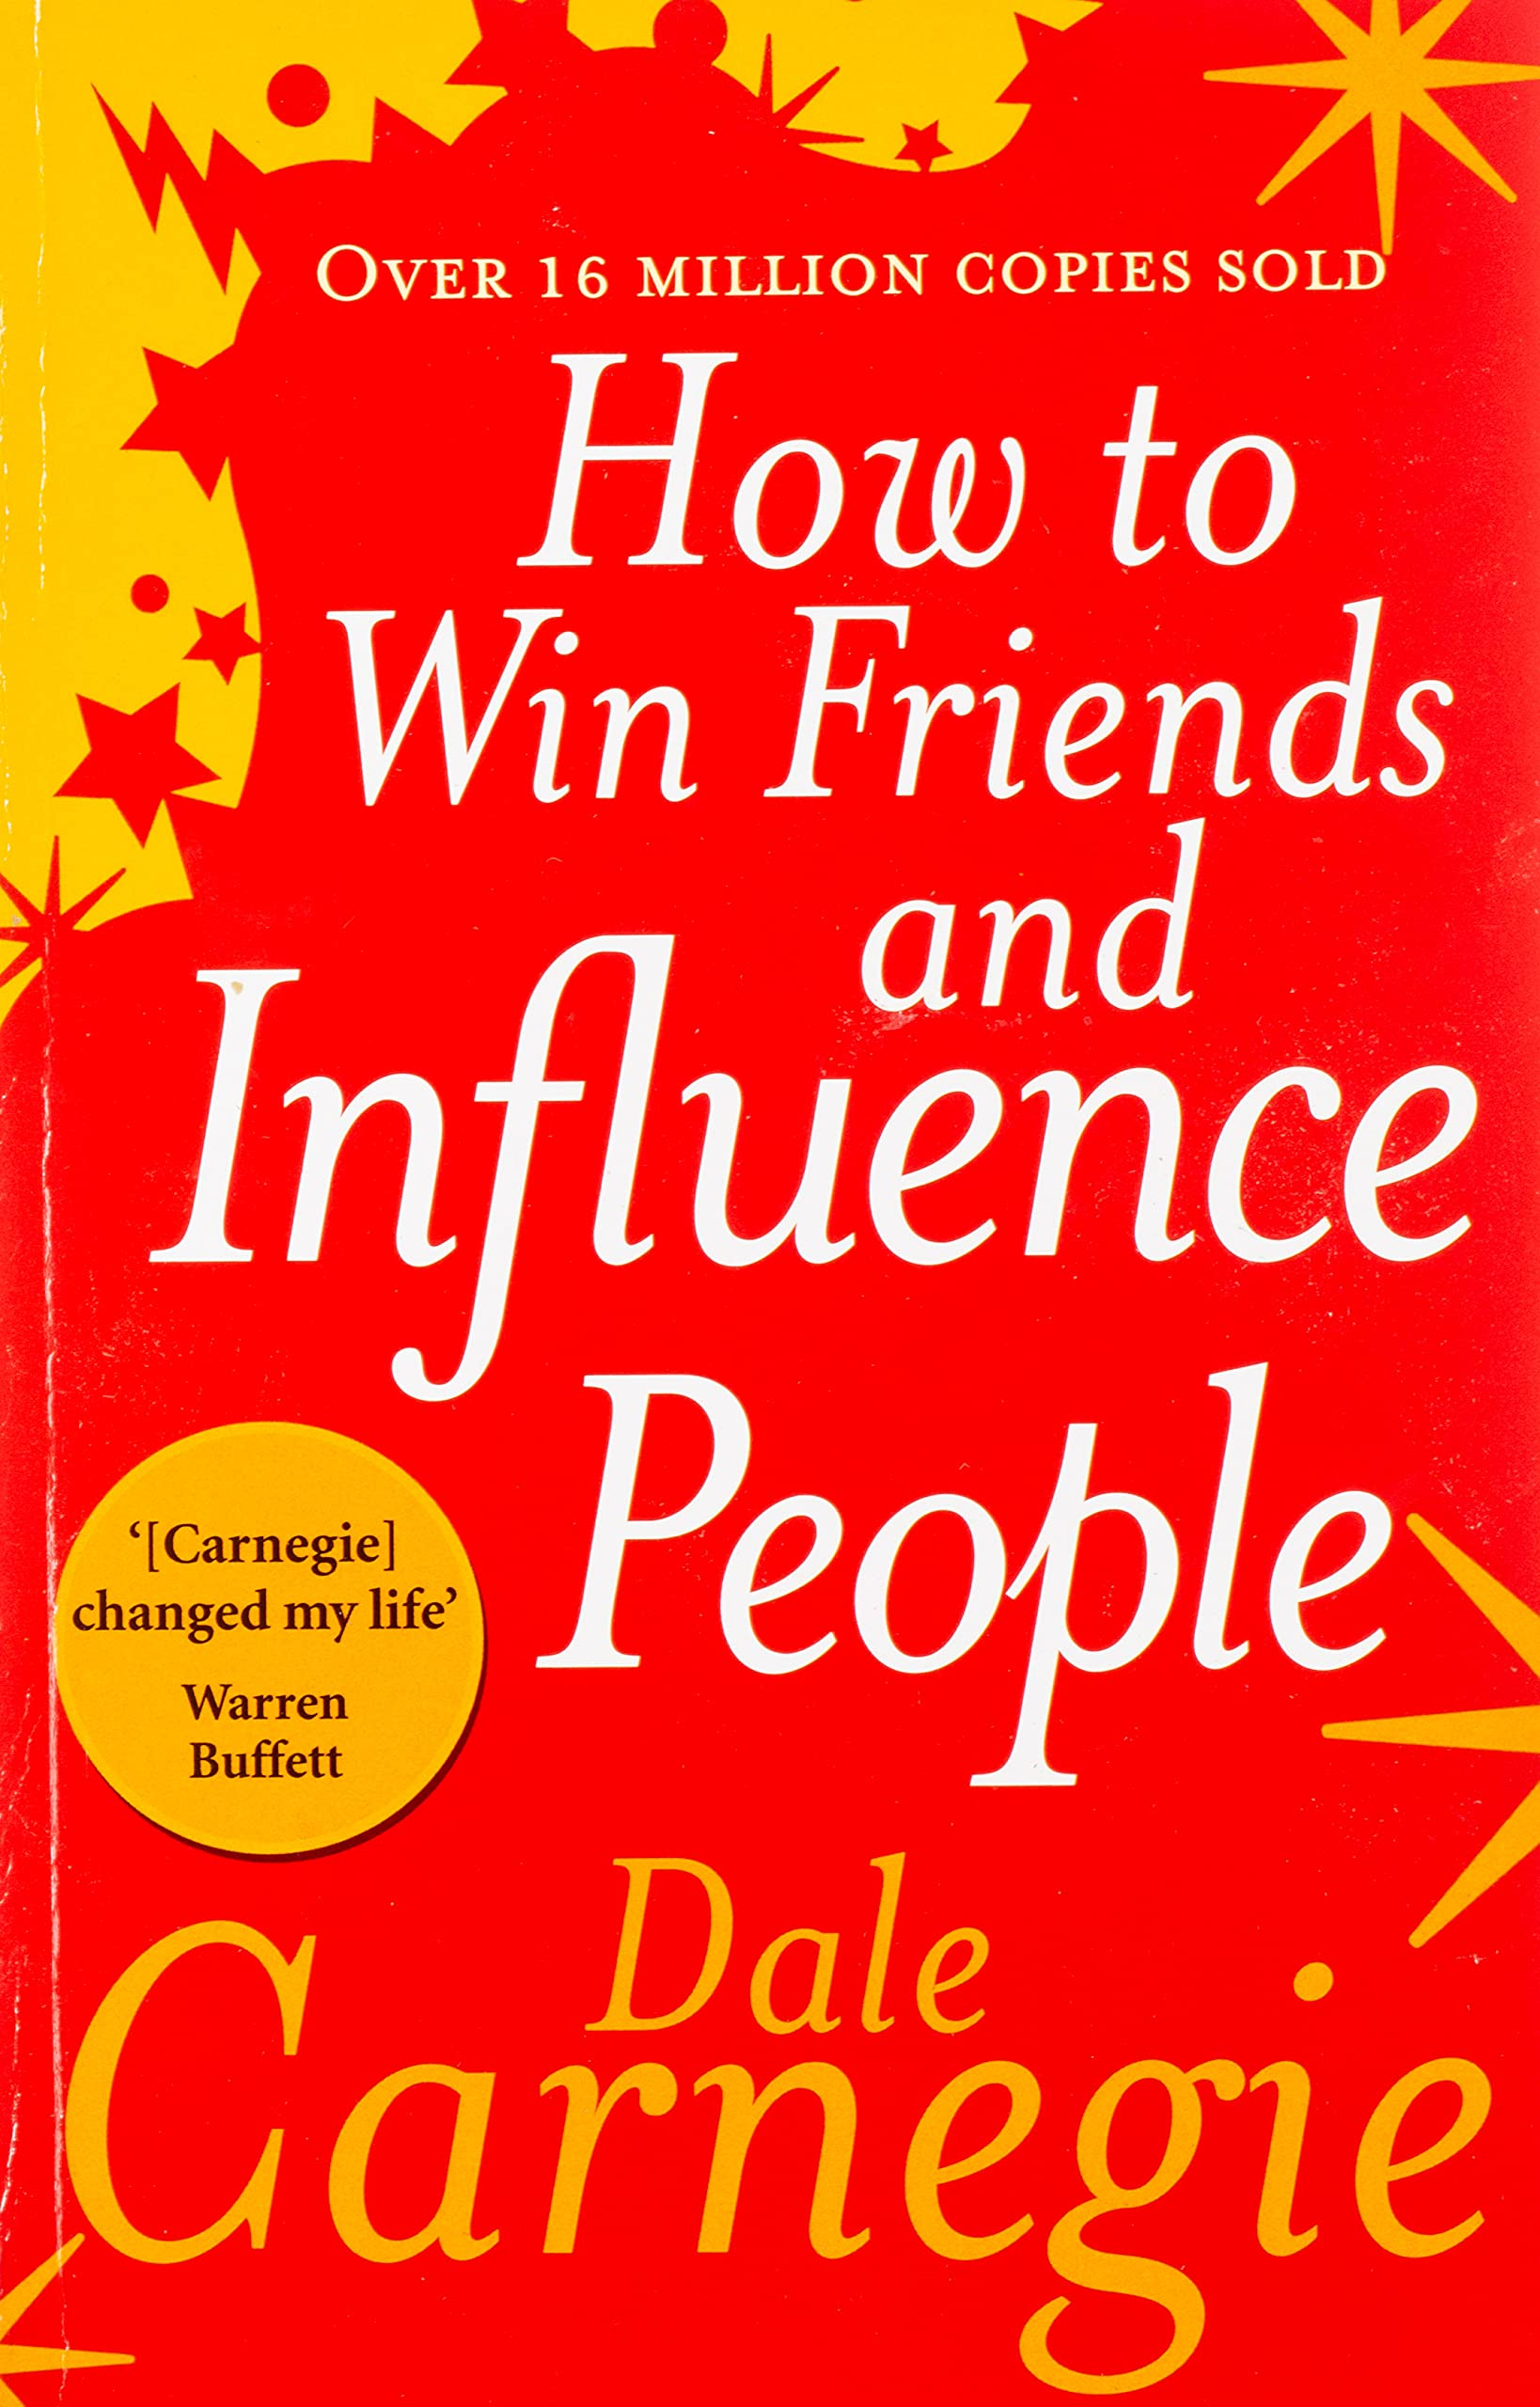 How to Win Friends and Influence People by Dale Carnegie — PARAMA